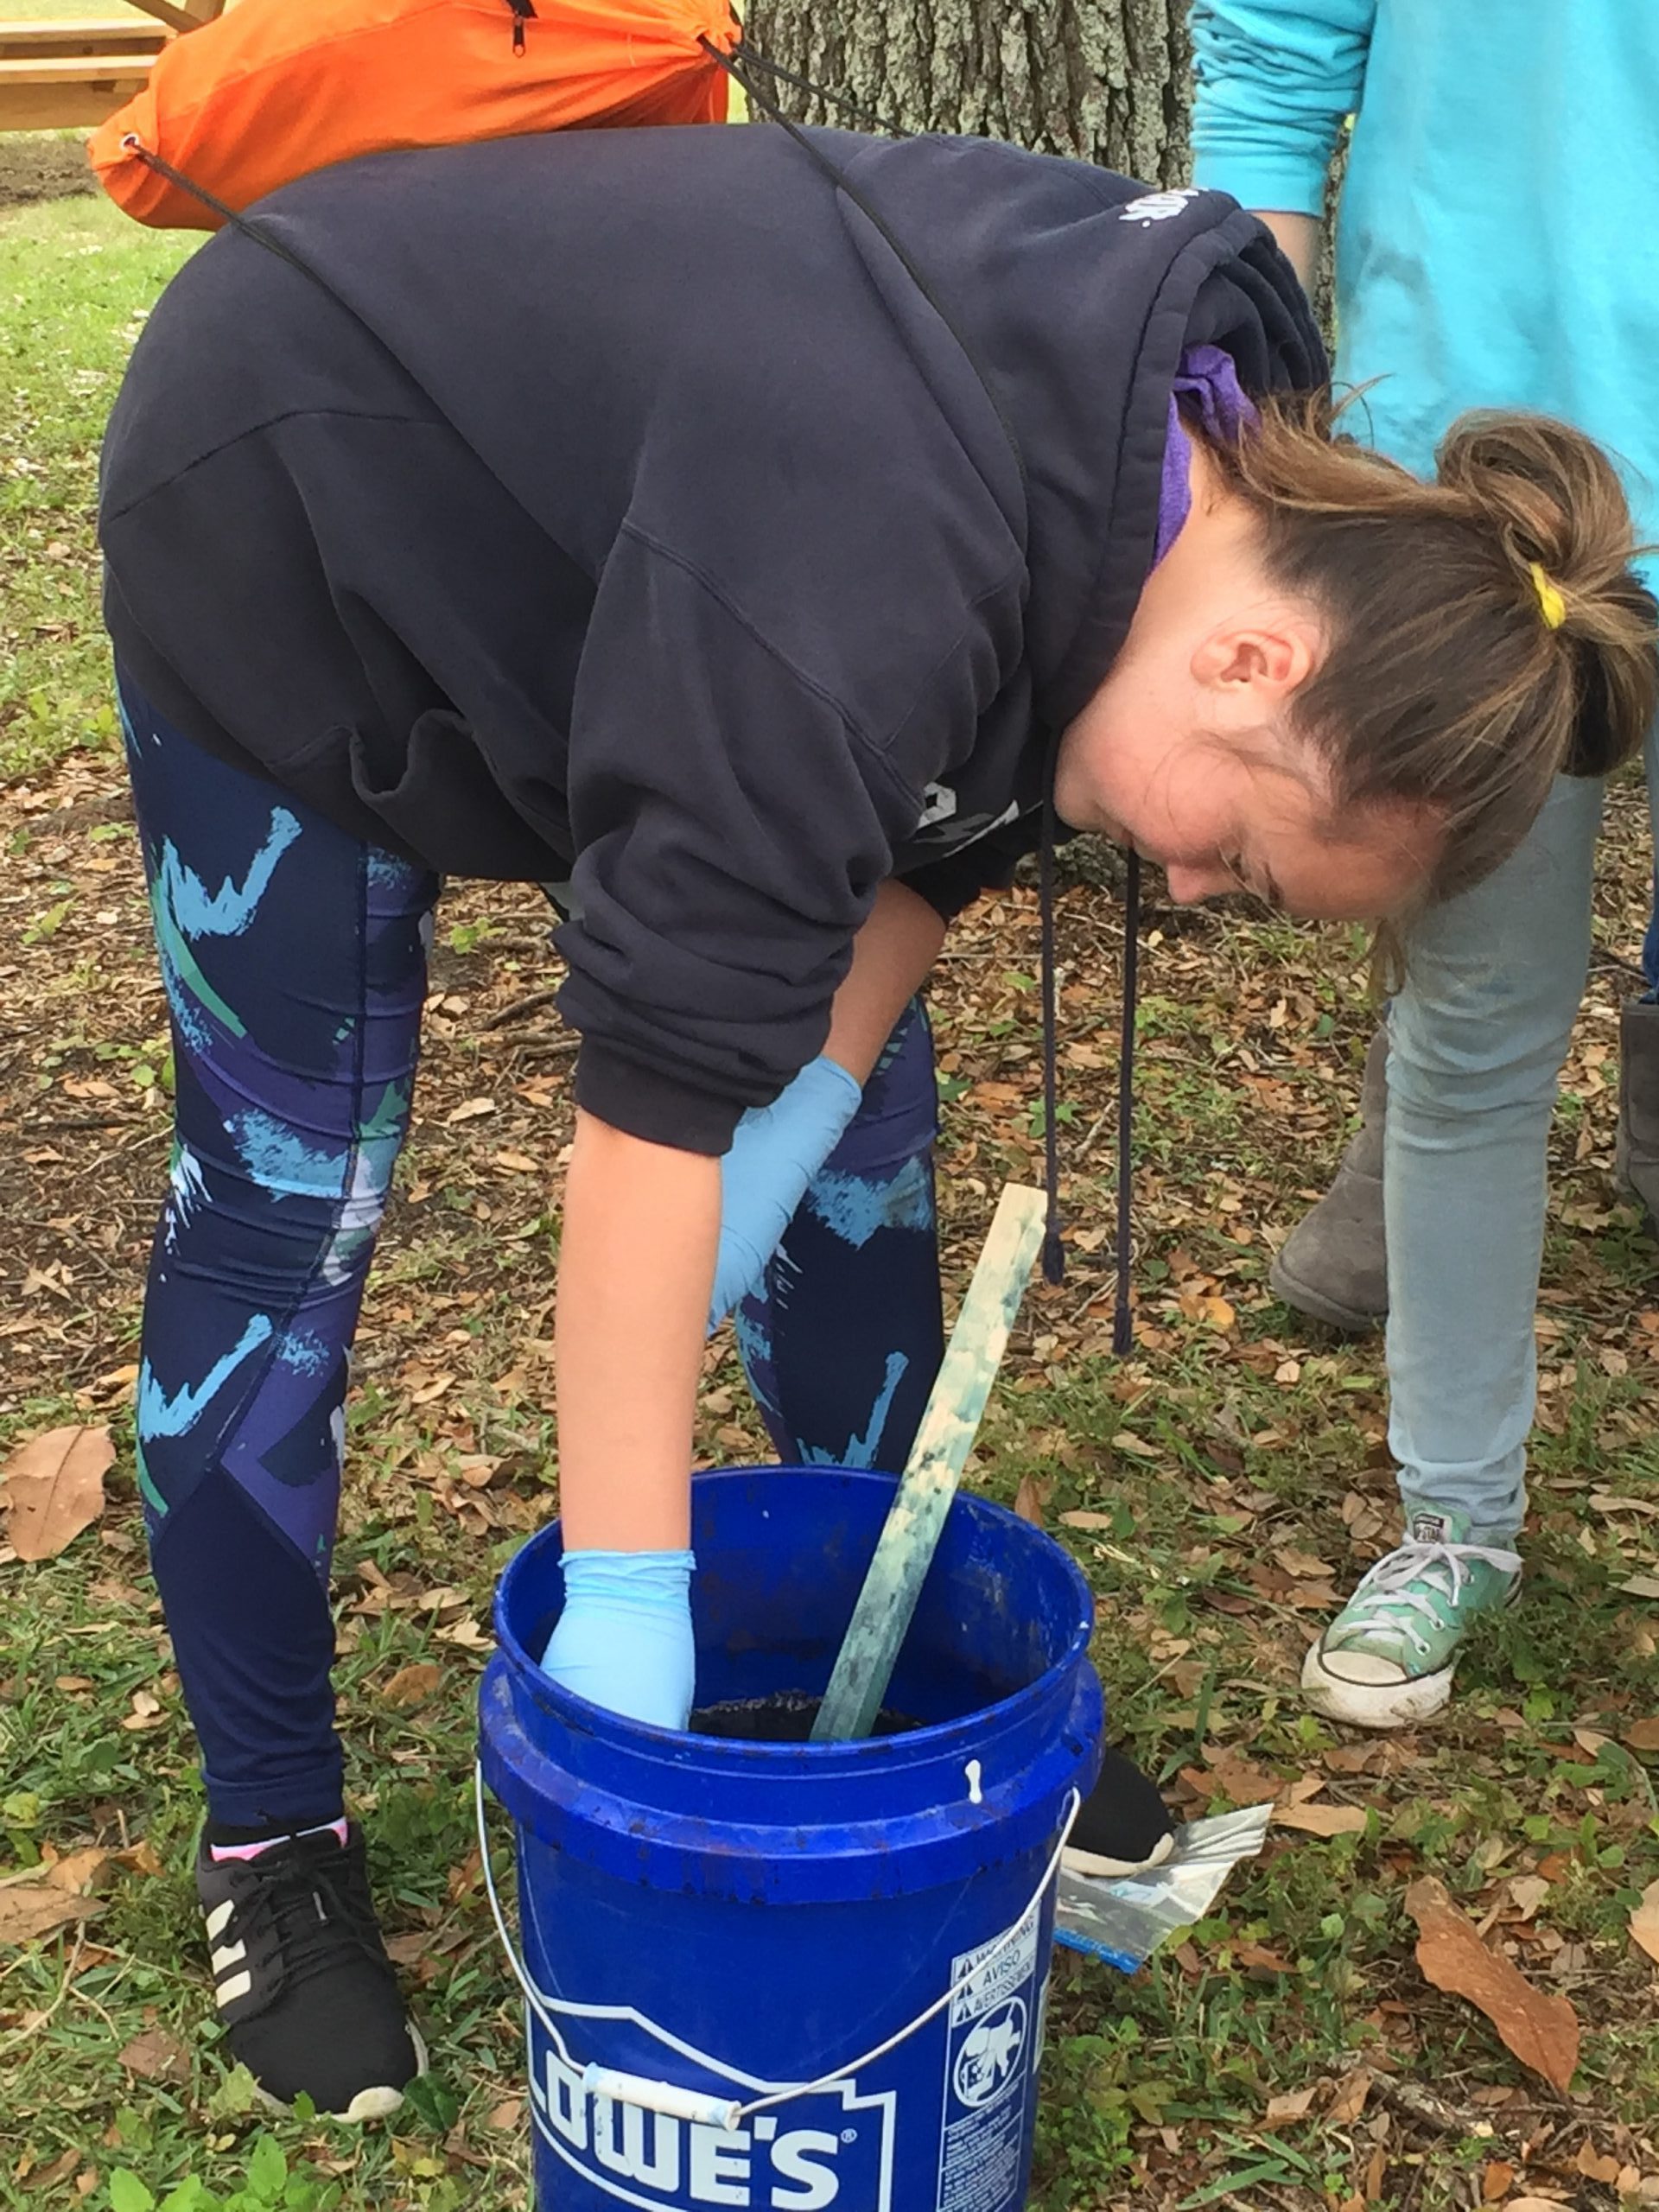 caucasian teenager with brown hair in bun wearing blue leggings and a blue hoodie bends over blue bucket with wooden stirer wearing blue gloves while standing on grass